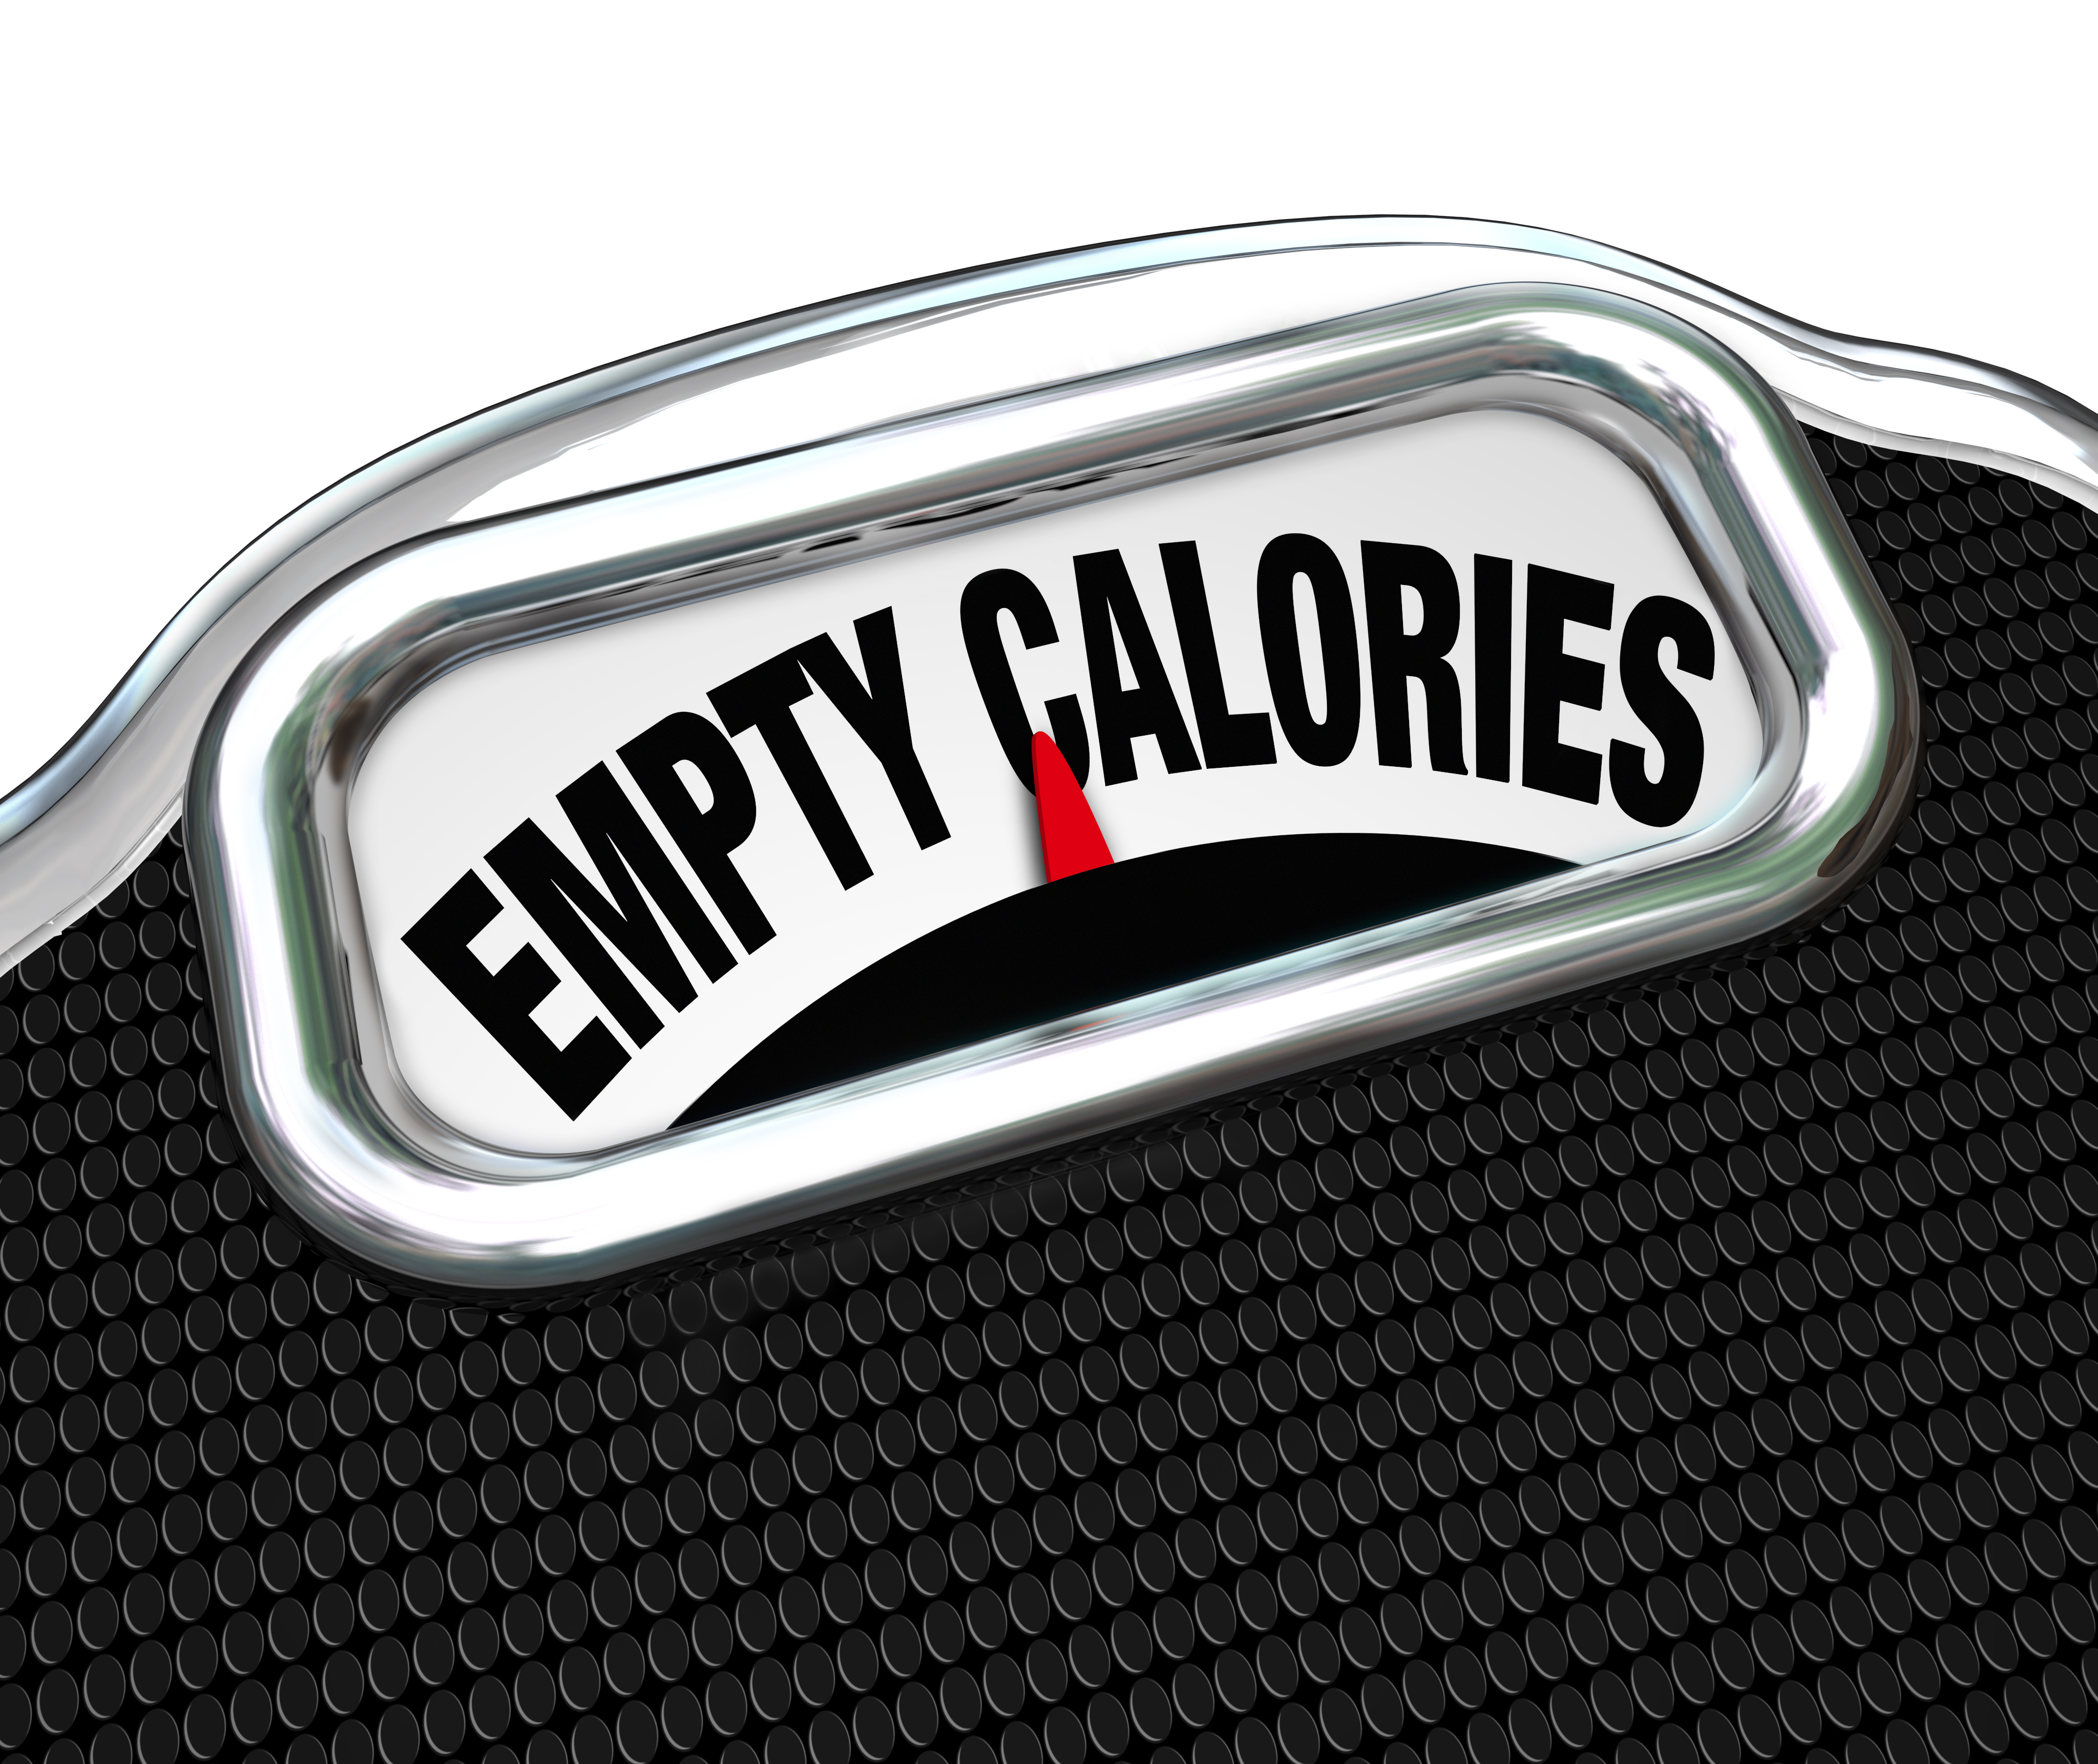 The words Empty Calories on the display of a scale to illustrate the importance of eating nutritional foods for good health instead of junk or fast food such as snacks, candy or other sugary items